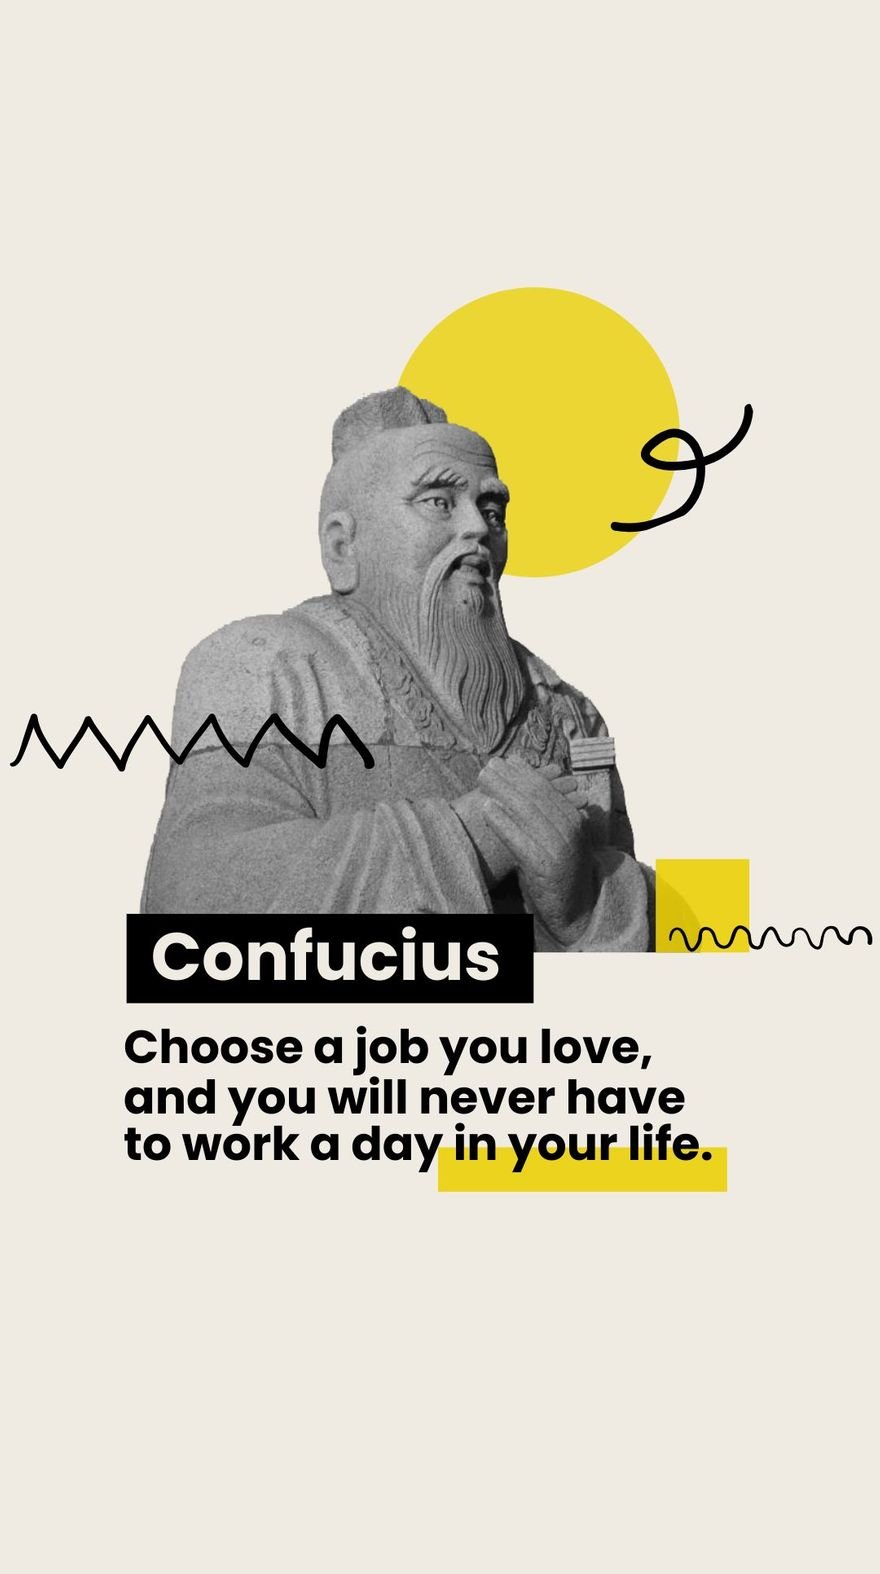 Confucius - Choose a job you love, and you will never have to work a day in your life.